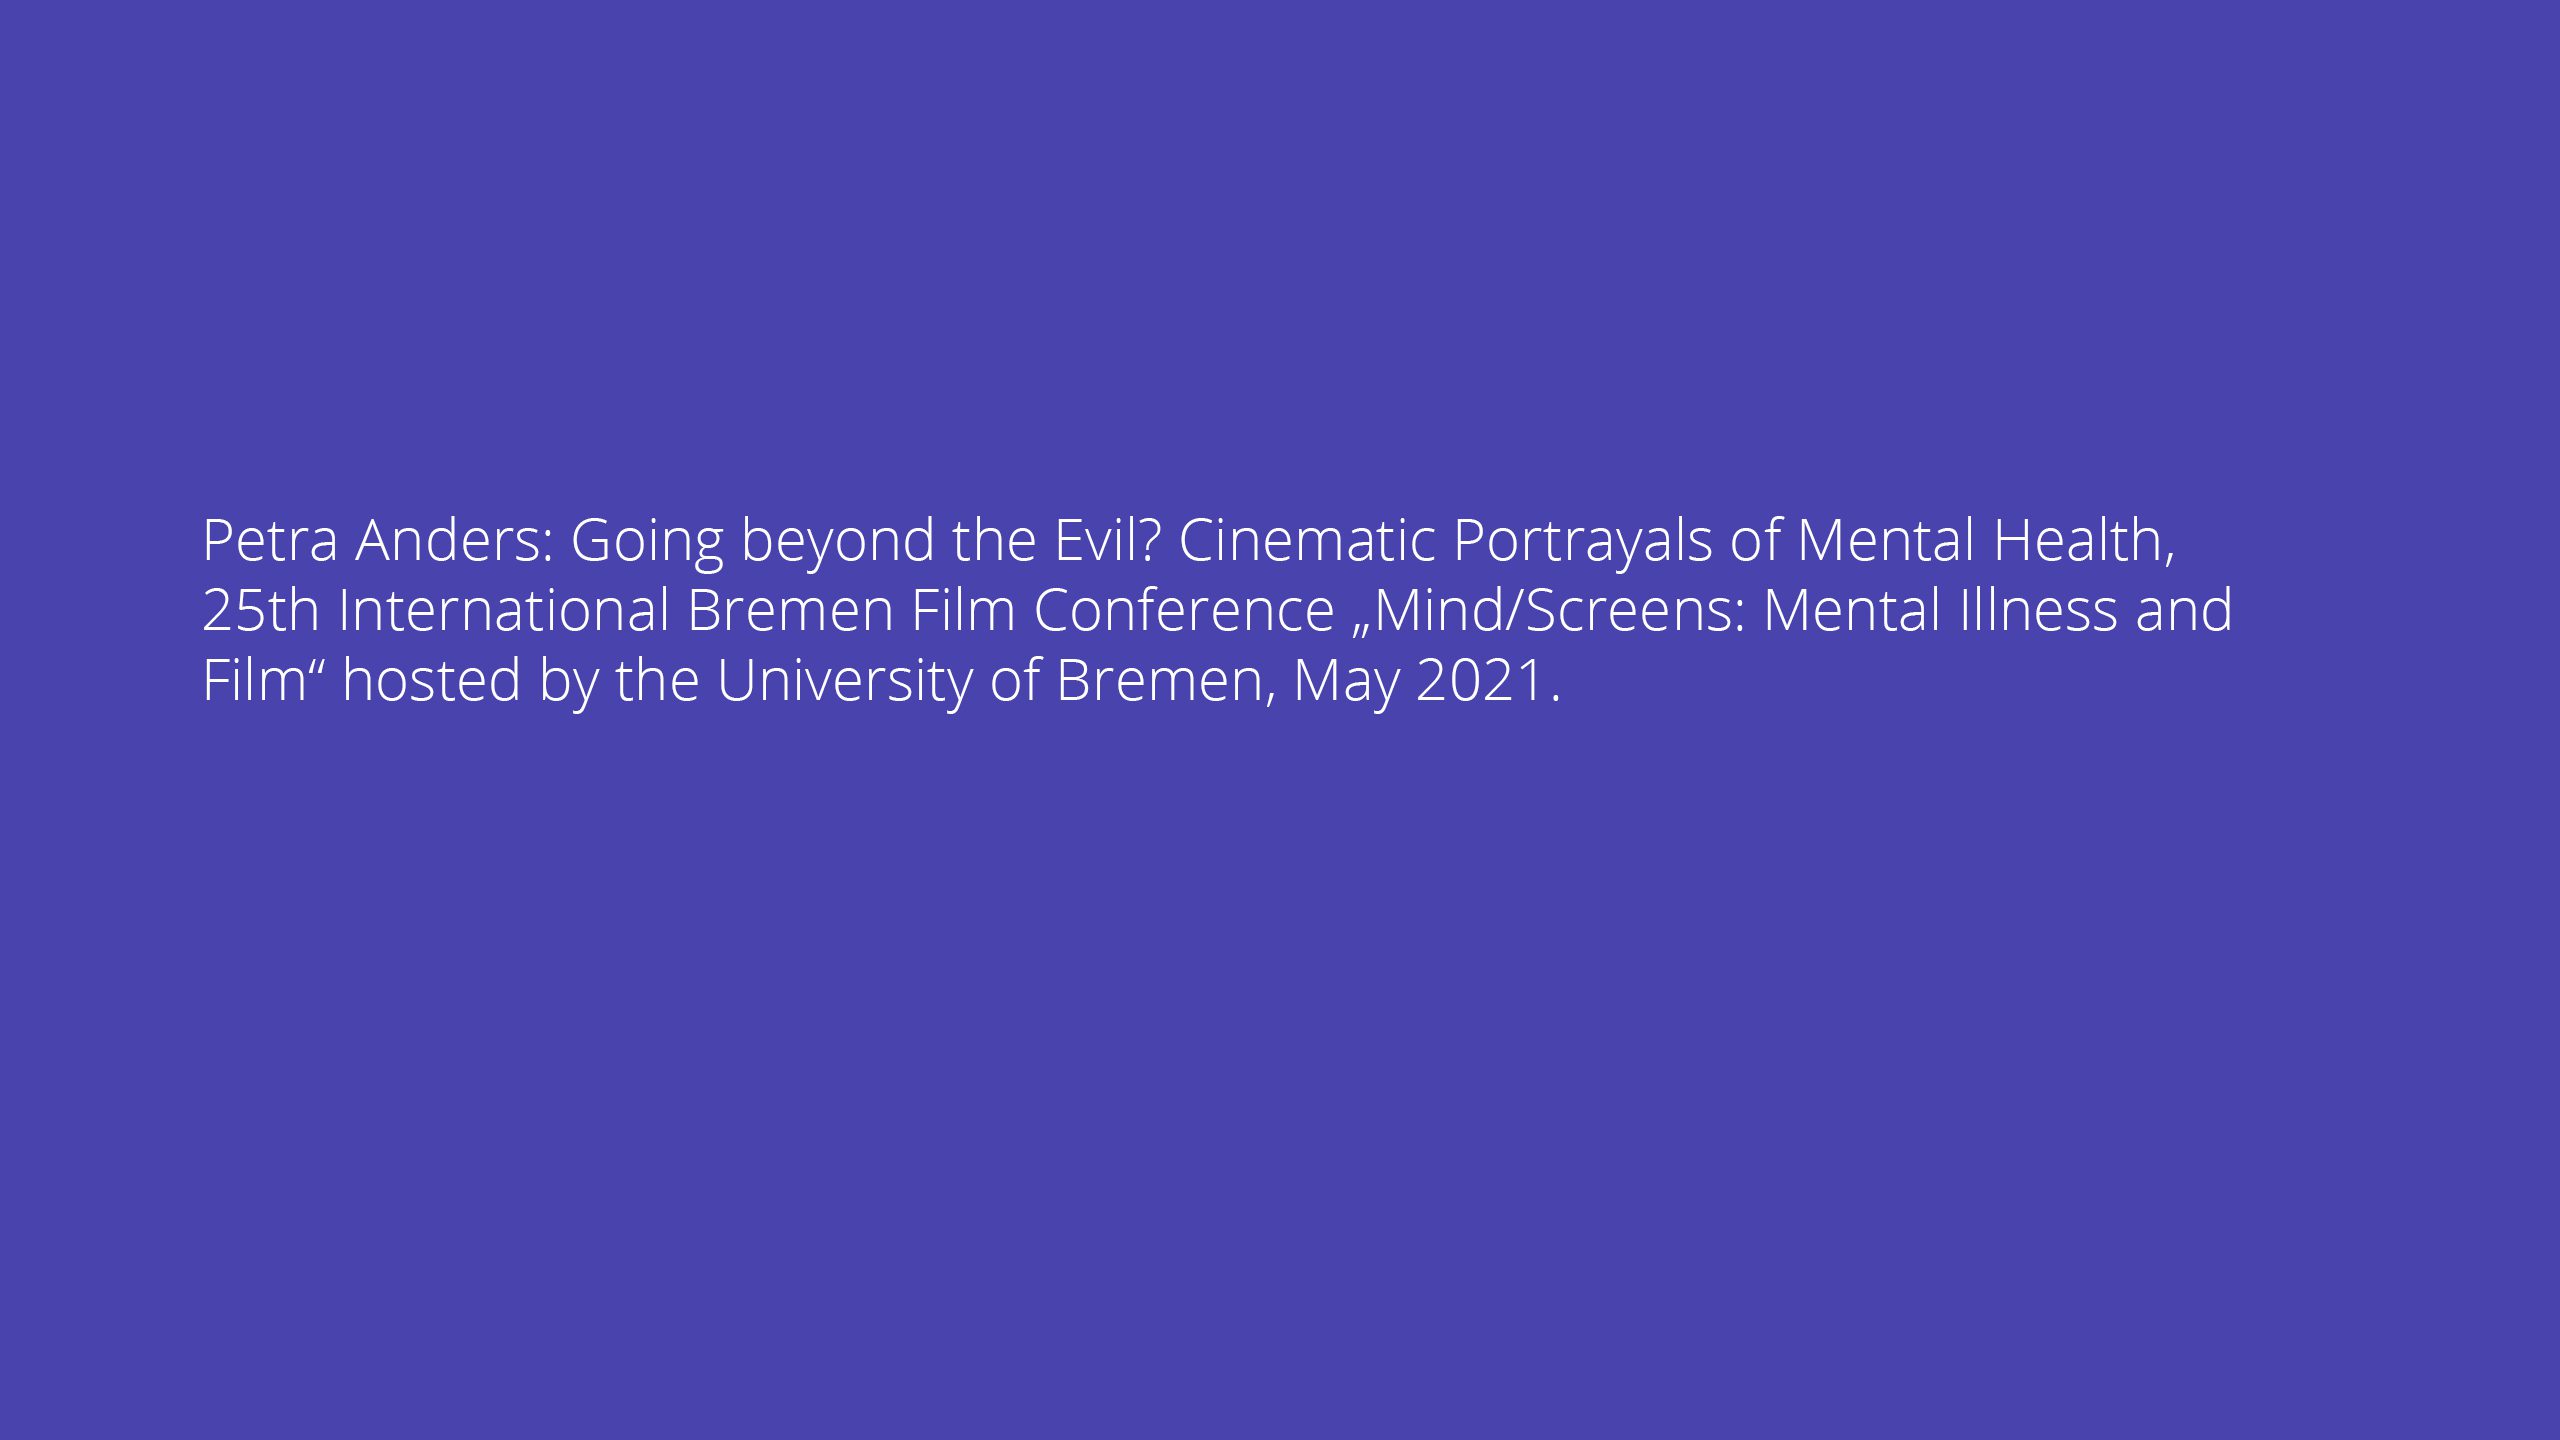 Petra Anders: Going beyond the Evil? Cinematic Portrayals of Mental Health, 25th International Bremen Film Conference „Mind/Screens: Mental Illness and Film“ hosted by the University of Bremen, May 2021.